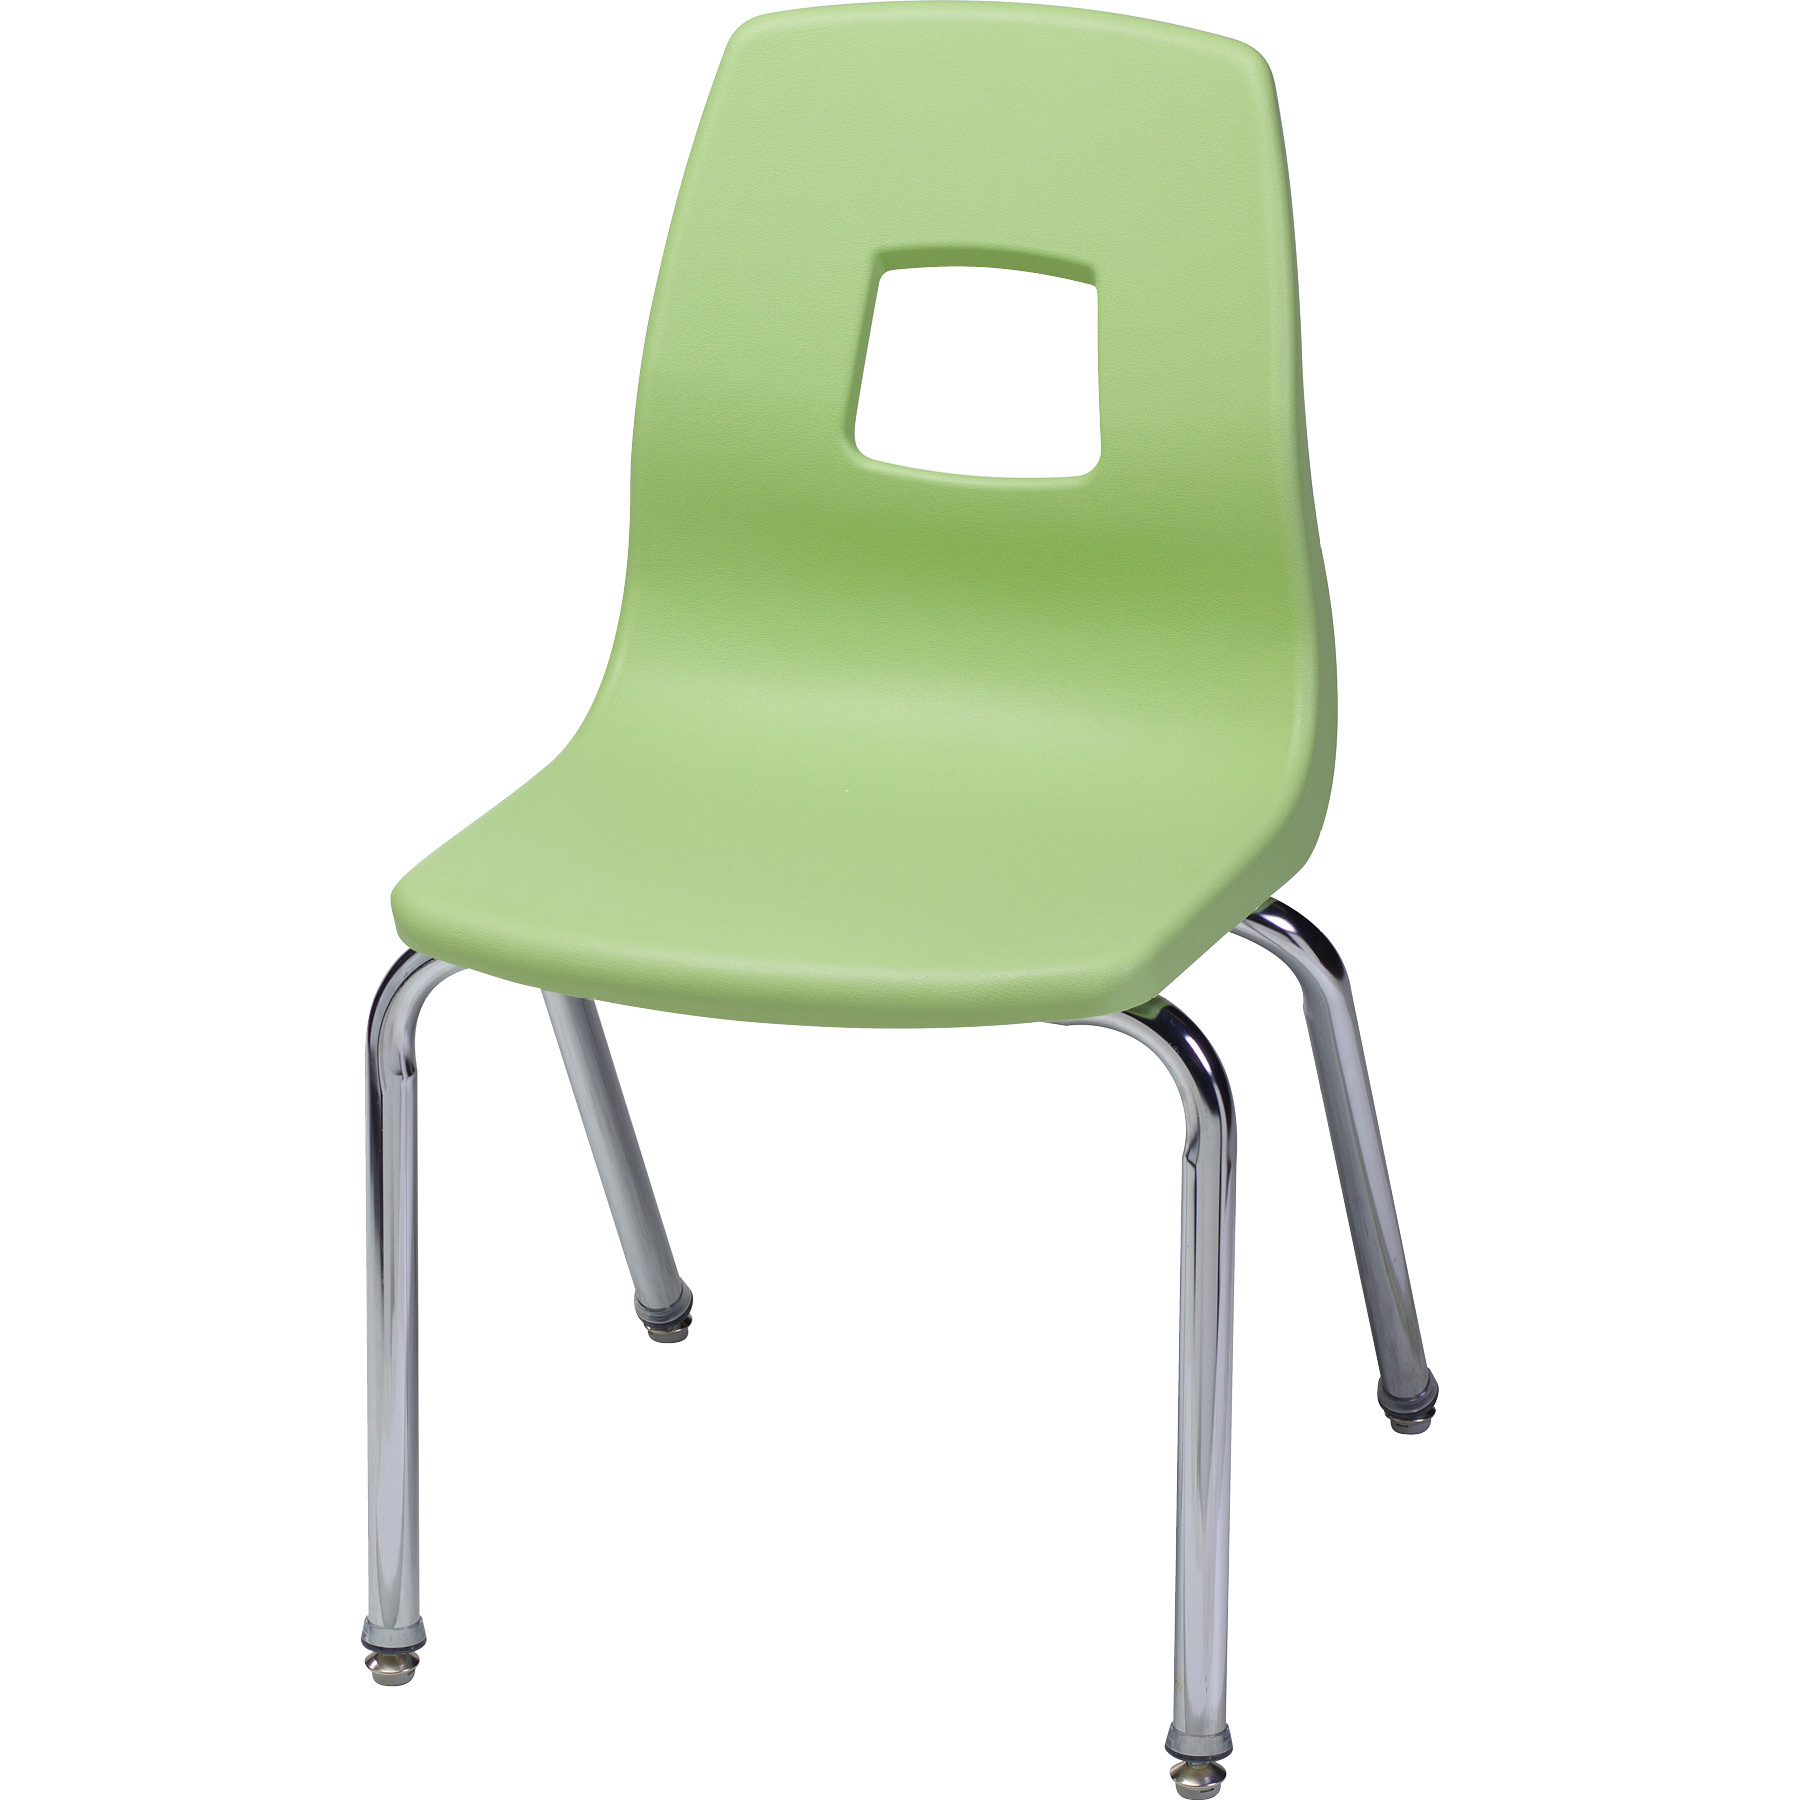 A268 Capella Stacking chair